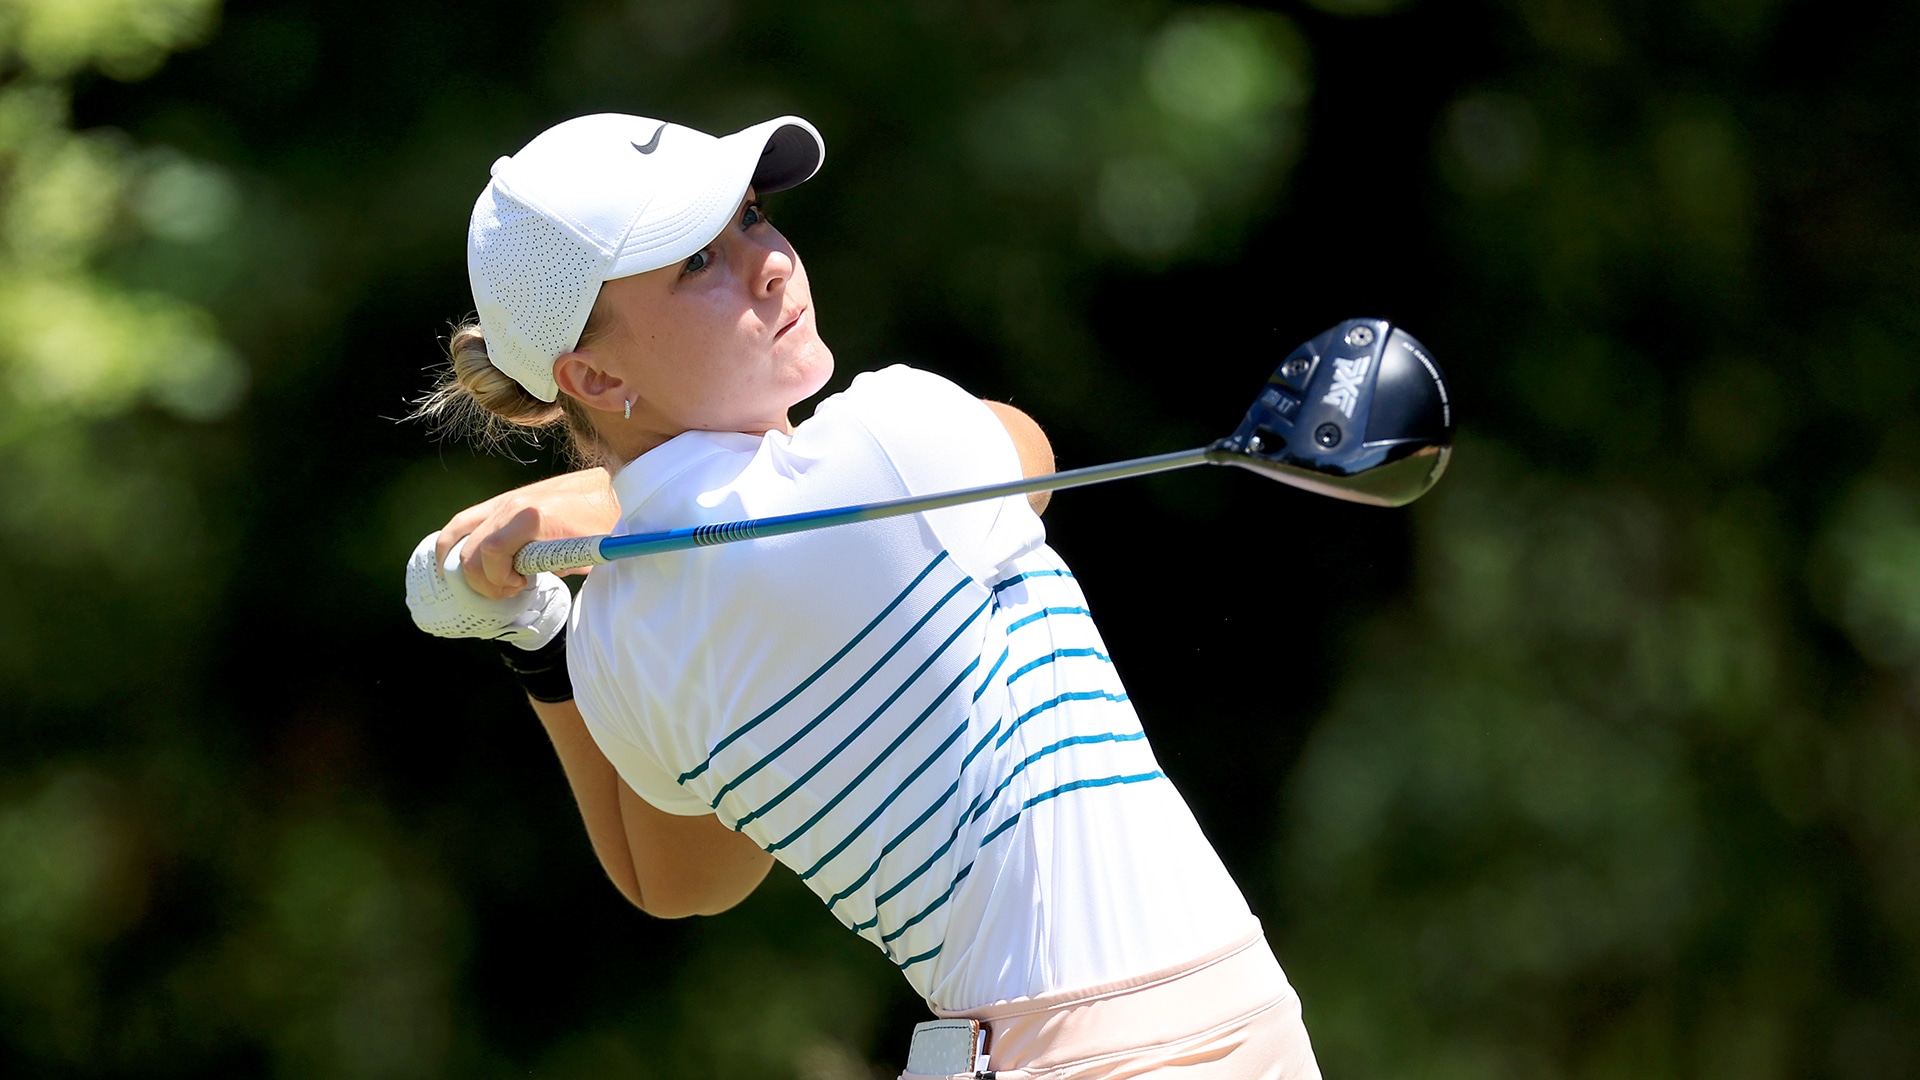 USC signee Bailey Shoemaker among amateurs at second stage of LPGA Q-School